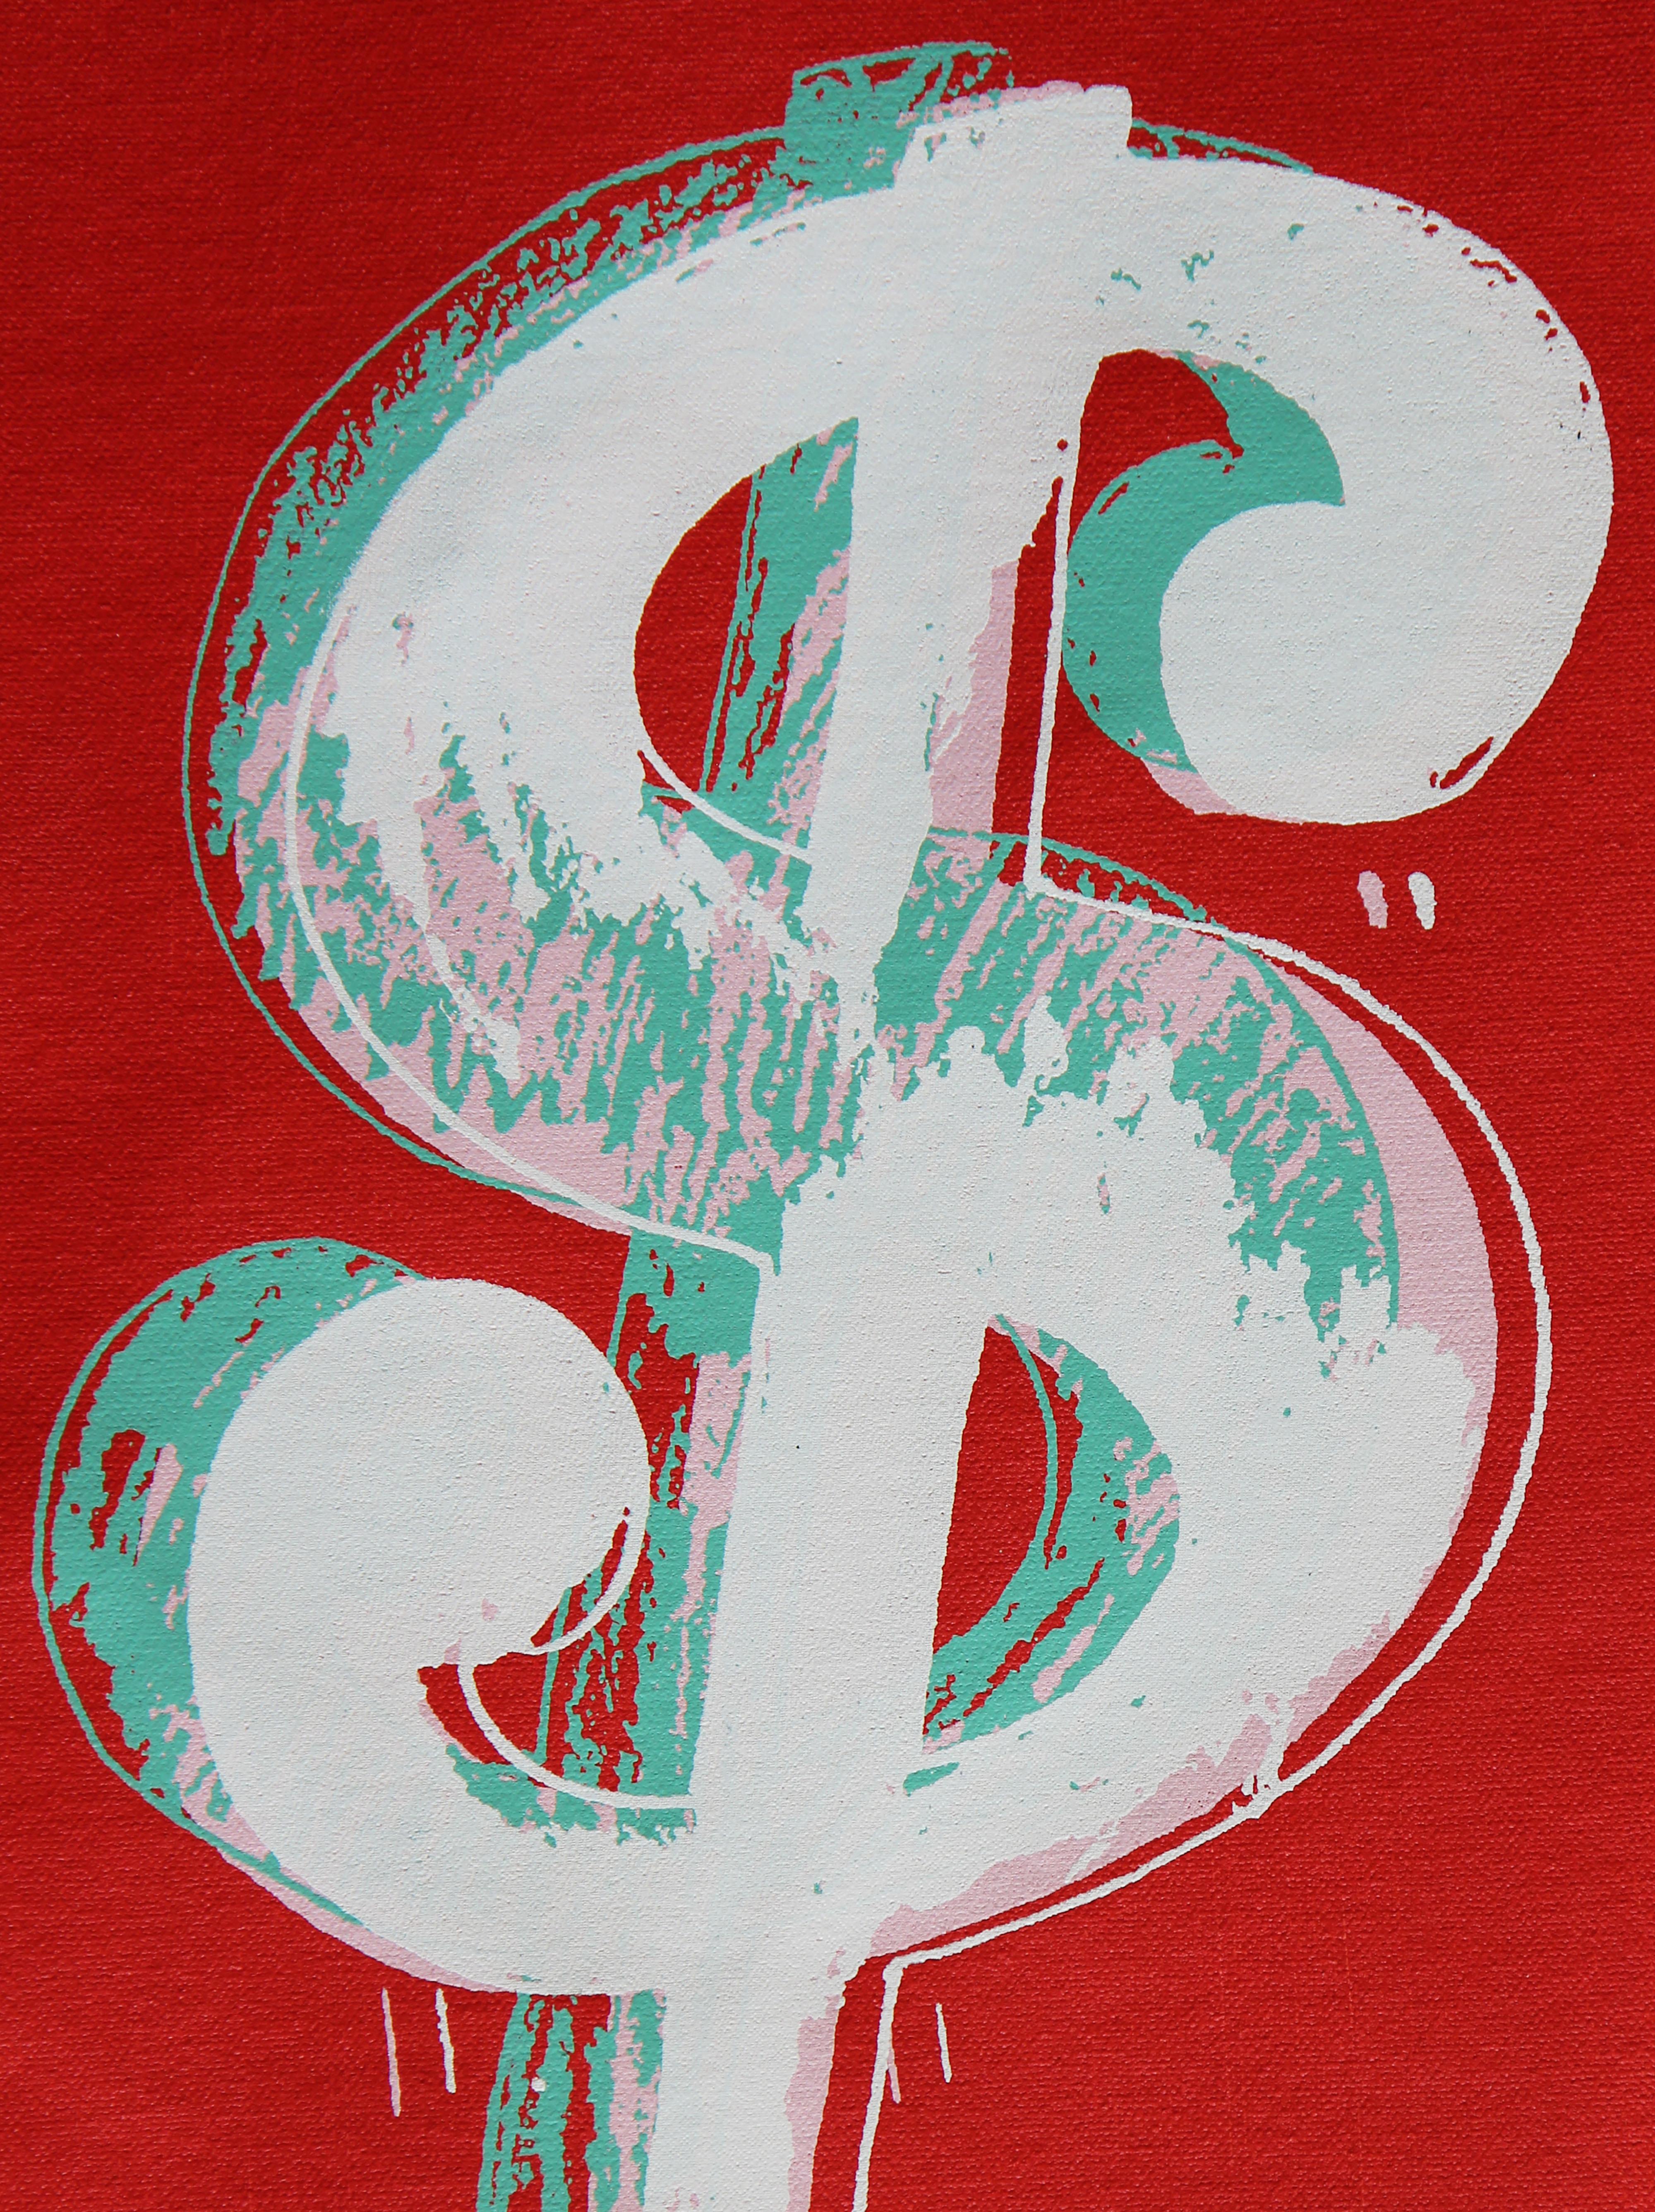 Denied Andy Warhol Dollar Sign (red green white)  Painting / Charles Lutz
Silkscreen and acrylic on linen with the Denied stamp of the Andy Warhol Art Authentication Board.
10 x 8